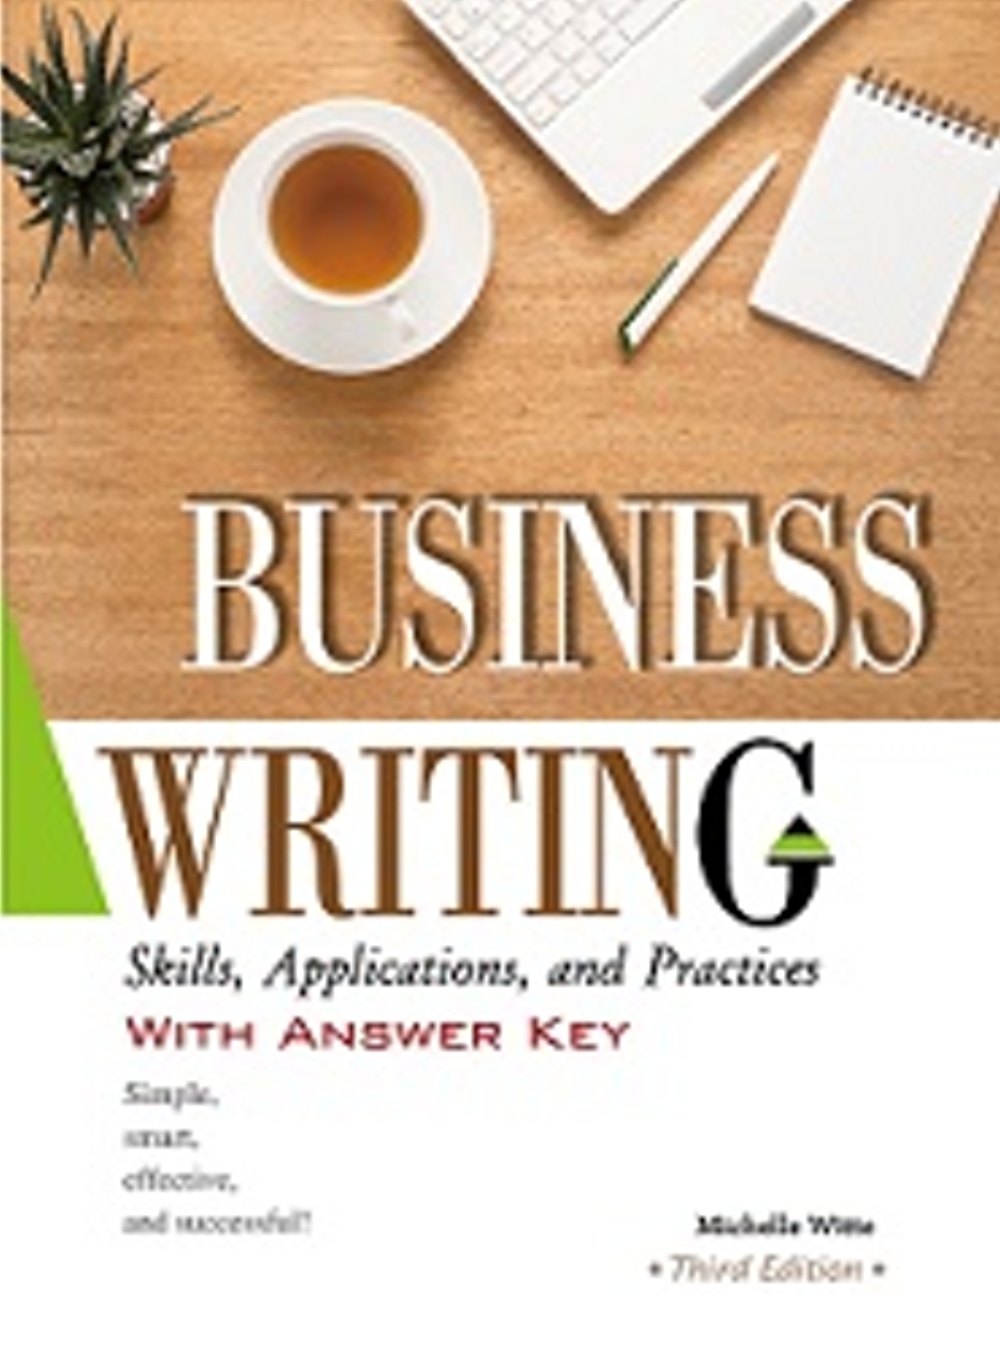 Business Writing: Skills, Applications, and Practices With Answer Key【Third Edition】 (16K彩色精裝)(三版)